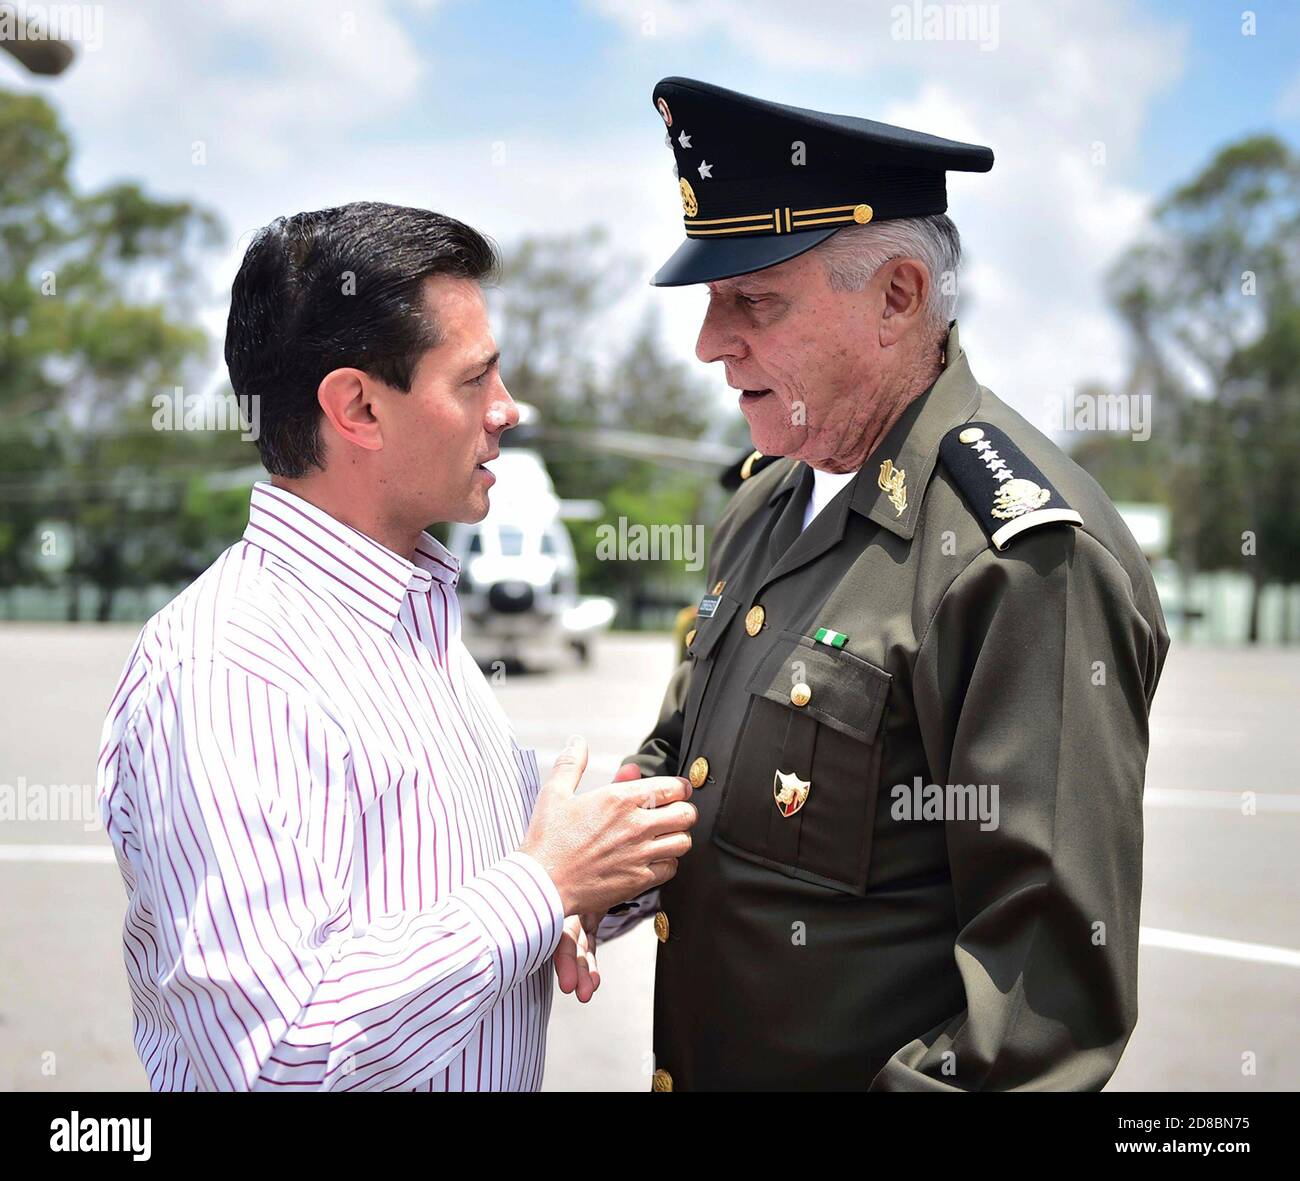 Mexican President Enrique Pena Nieto, left, speaks with Defense Minister Gen. Salvador Cienfuegos Zepeda during an event June 27, 2017 in Puebla, Mexico. Cienfuegos was arrested October 16, 2020 at Los Angeles International Airport and charged with drug-related corruption. Stock Photo